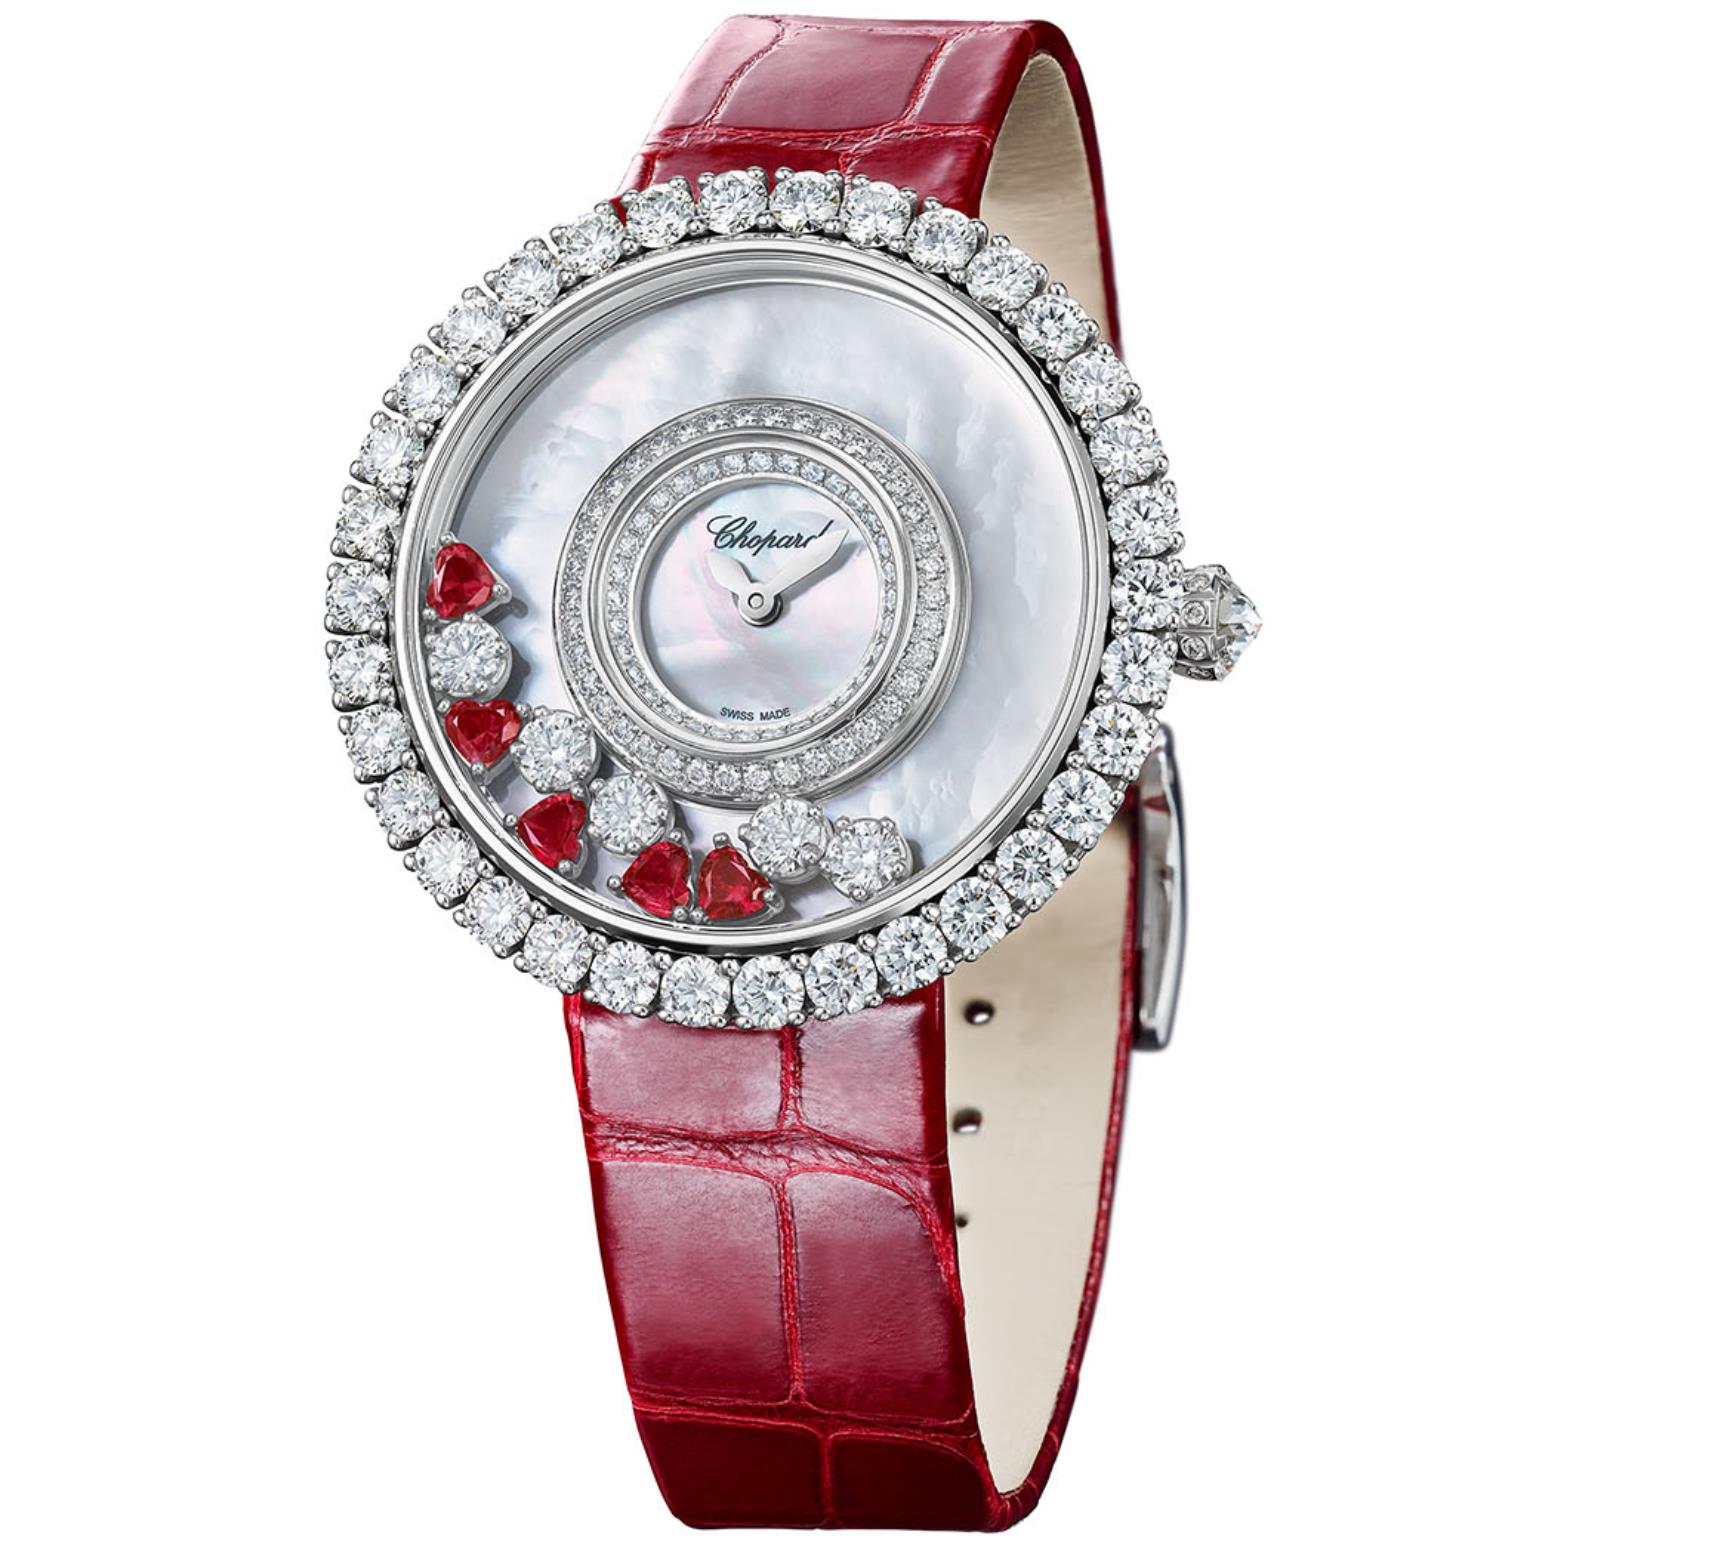 The 18k white gold fake watch is decorated with diamonds.